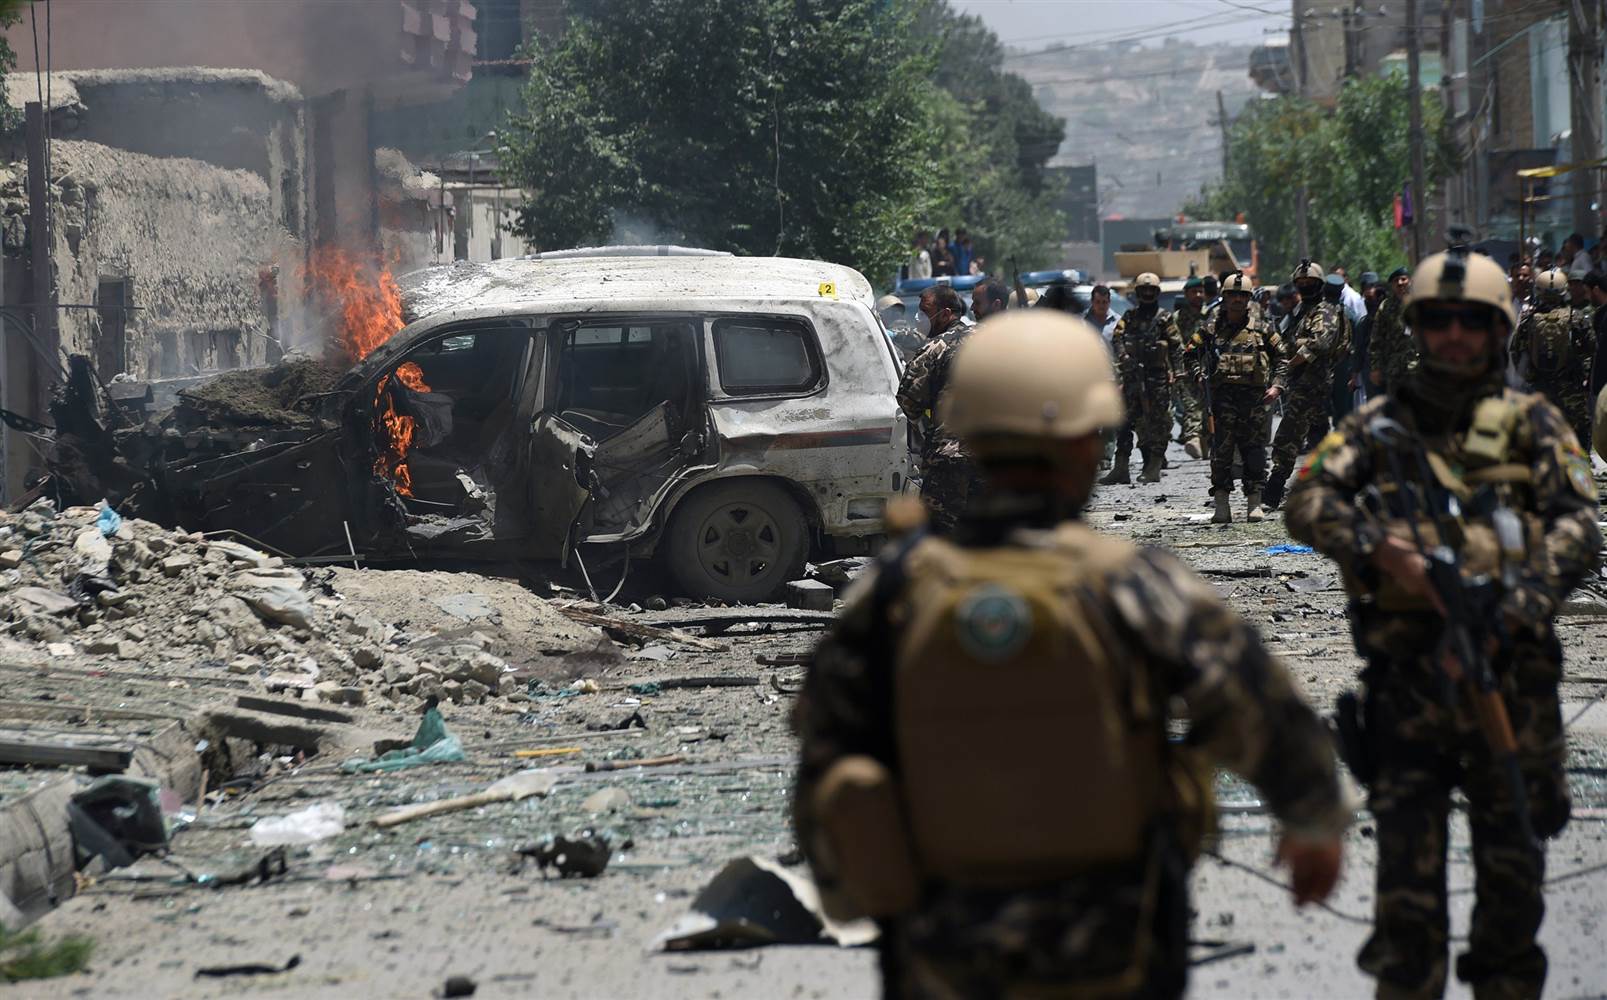 Car bomb blast in afghanistan on governor's Convoy